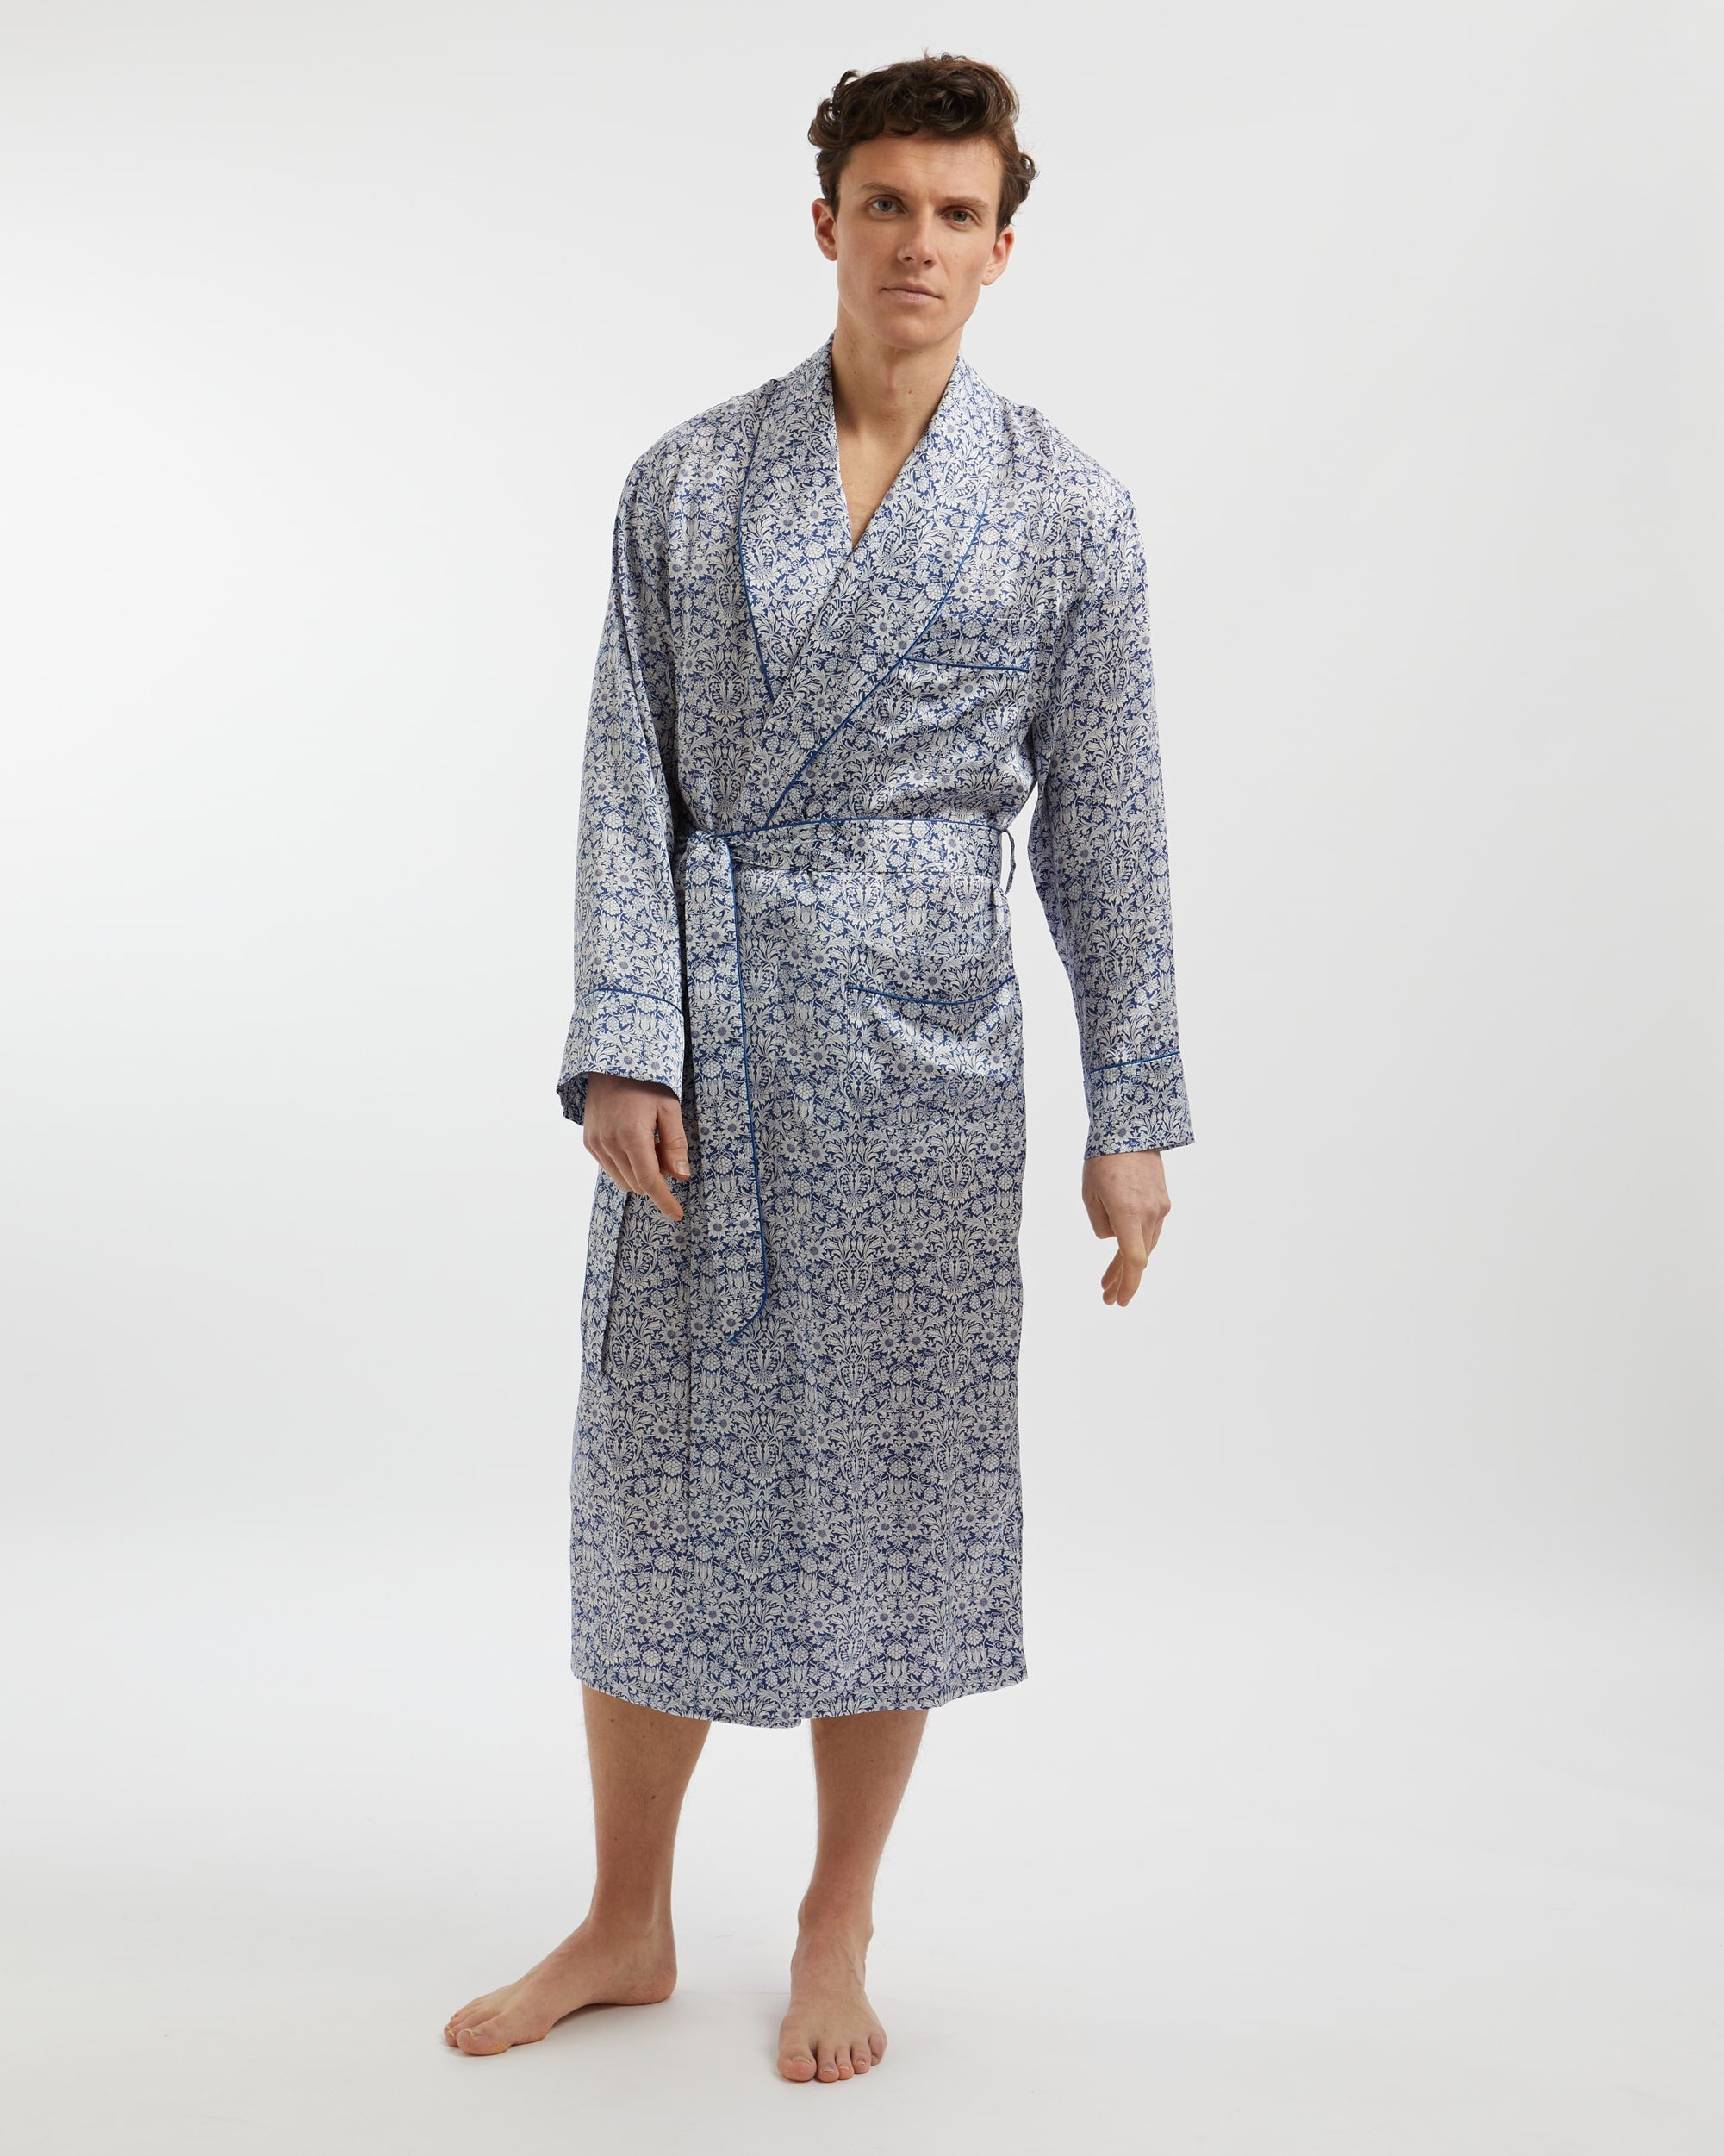 Mens Dressing Gowns & Robes | Towelling Gowns | Next